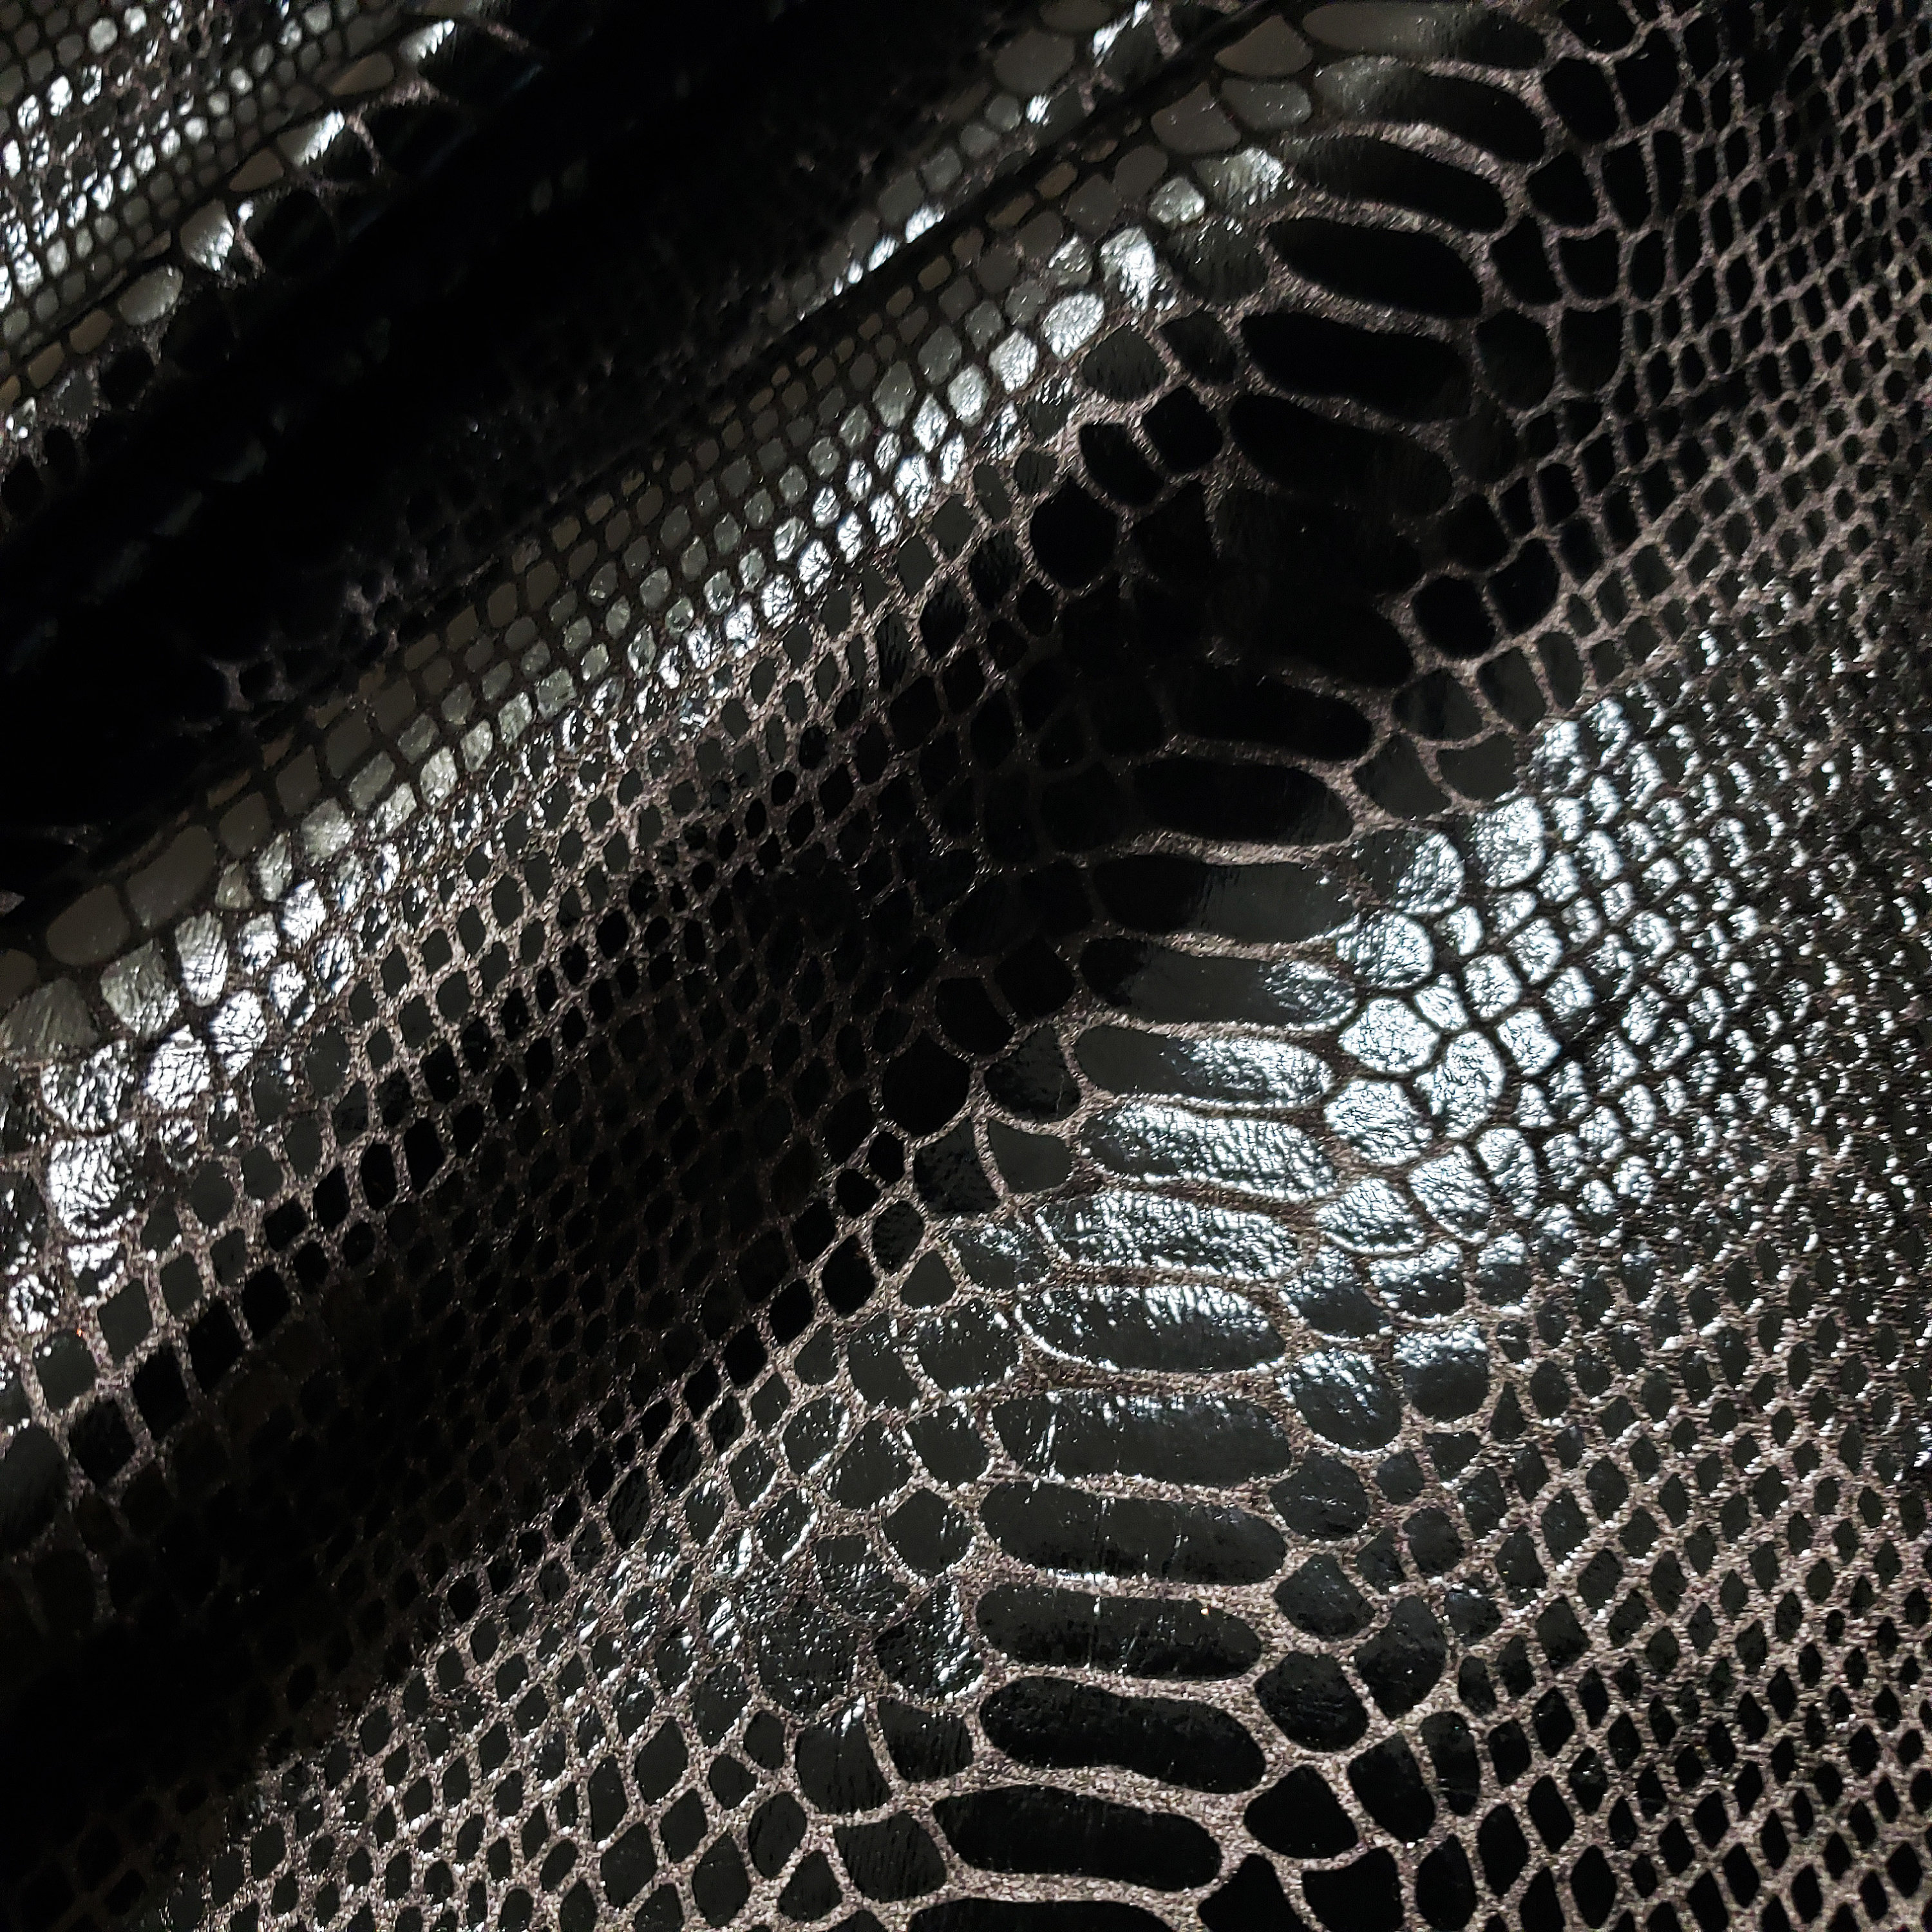 Ochre Foil Metallic Exotic Dragon Scales on Copper 4-Way Stretch Crushed  Ice Velvet Fabric by The Yard 